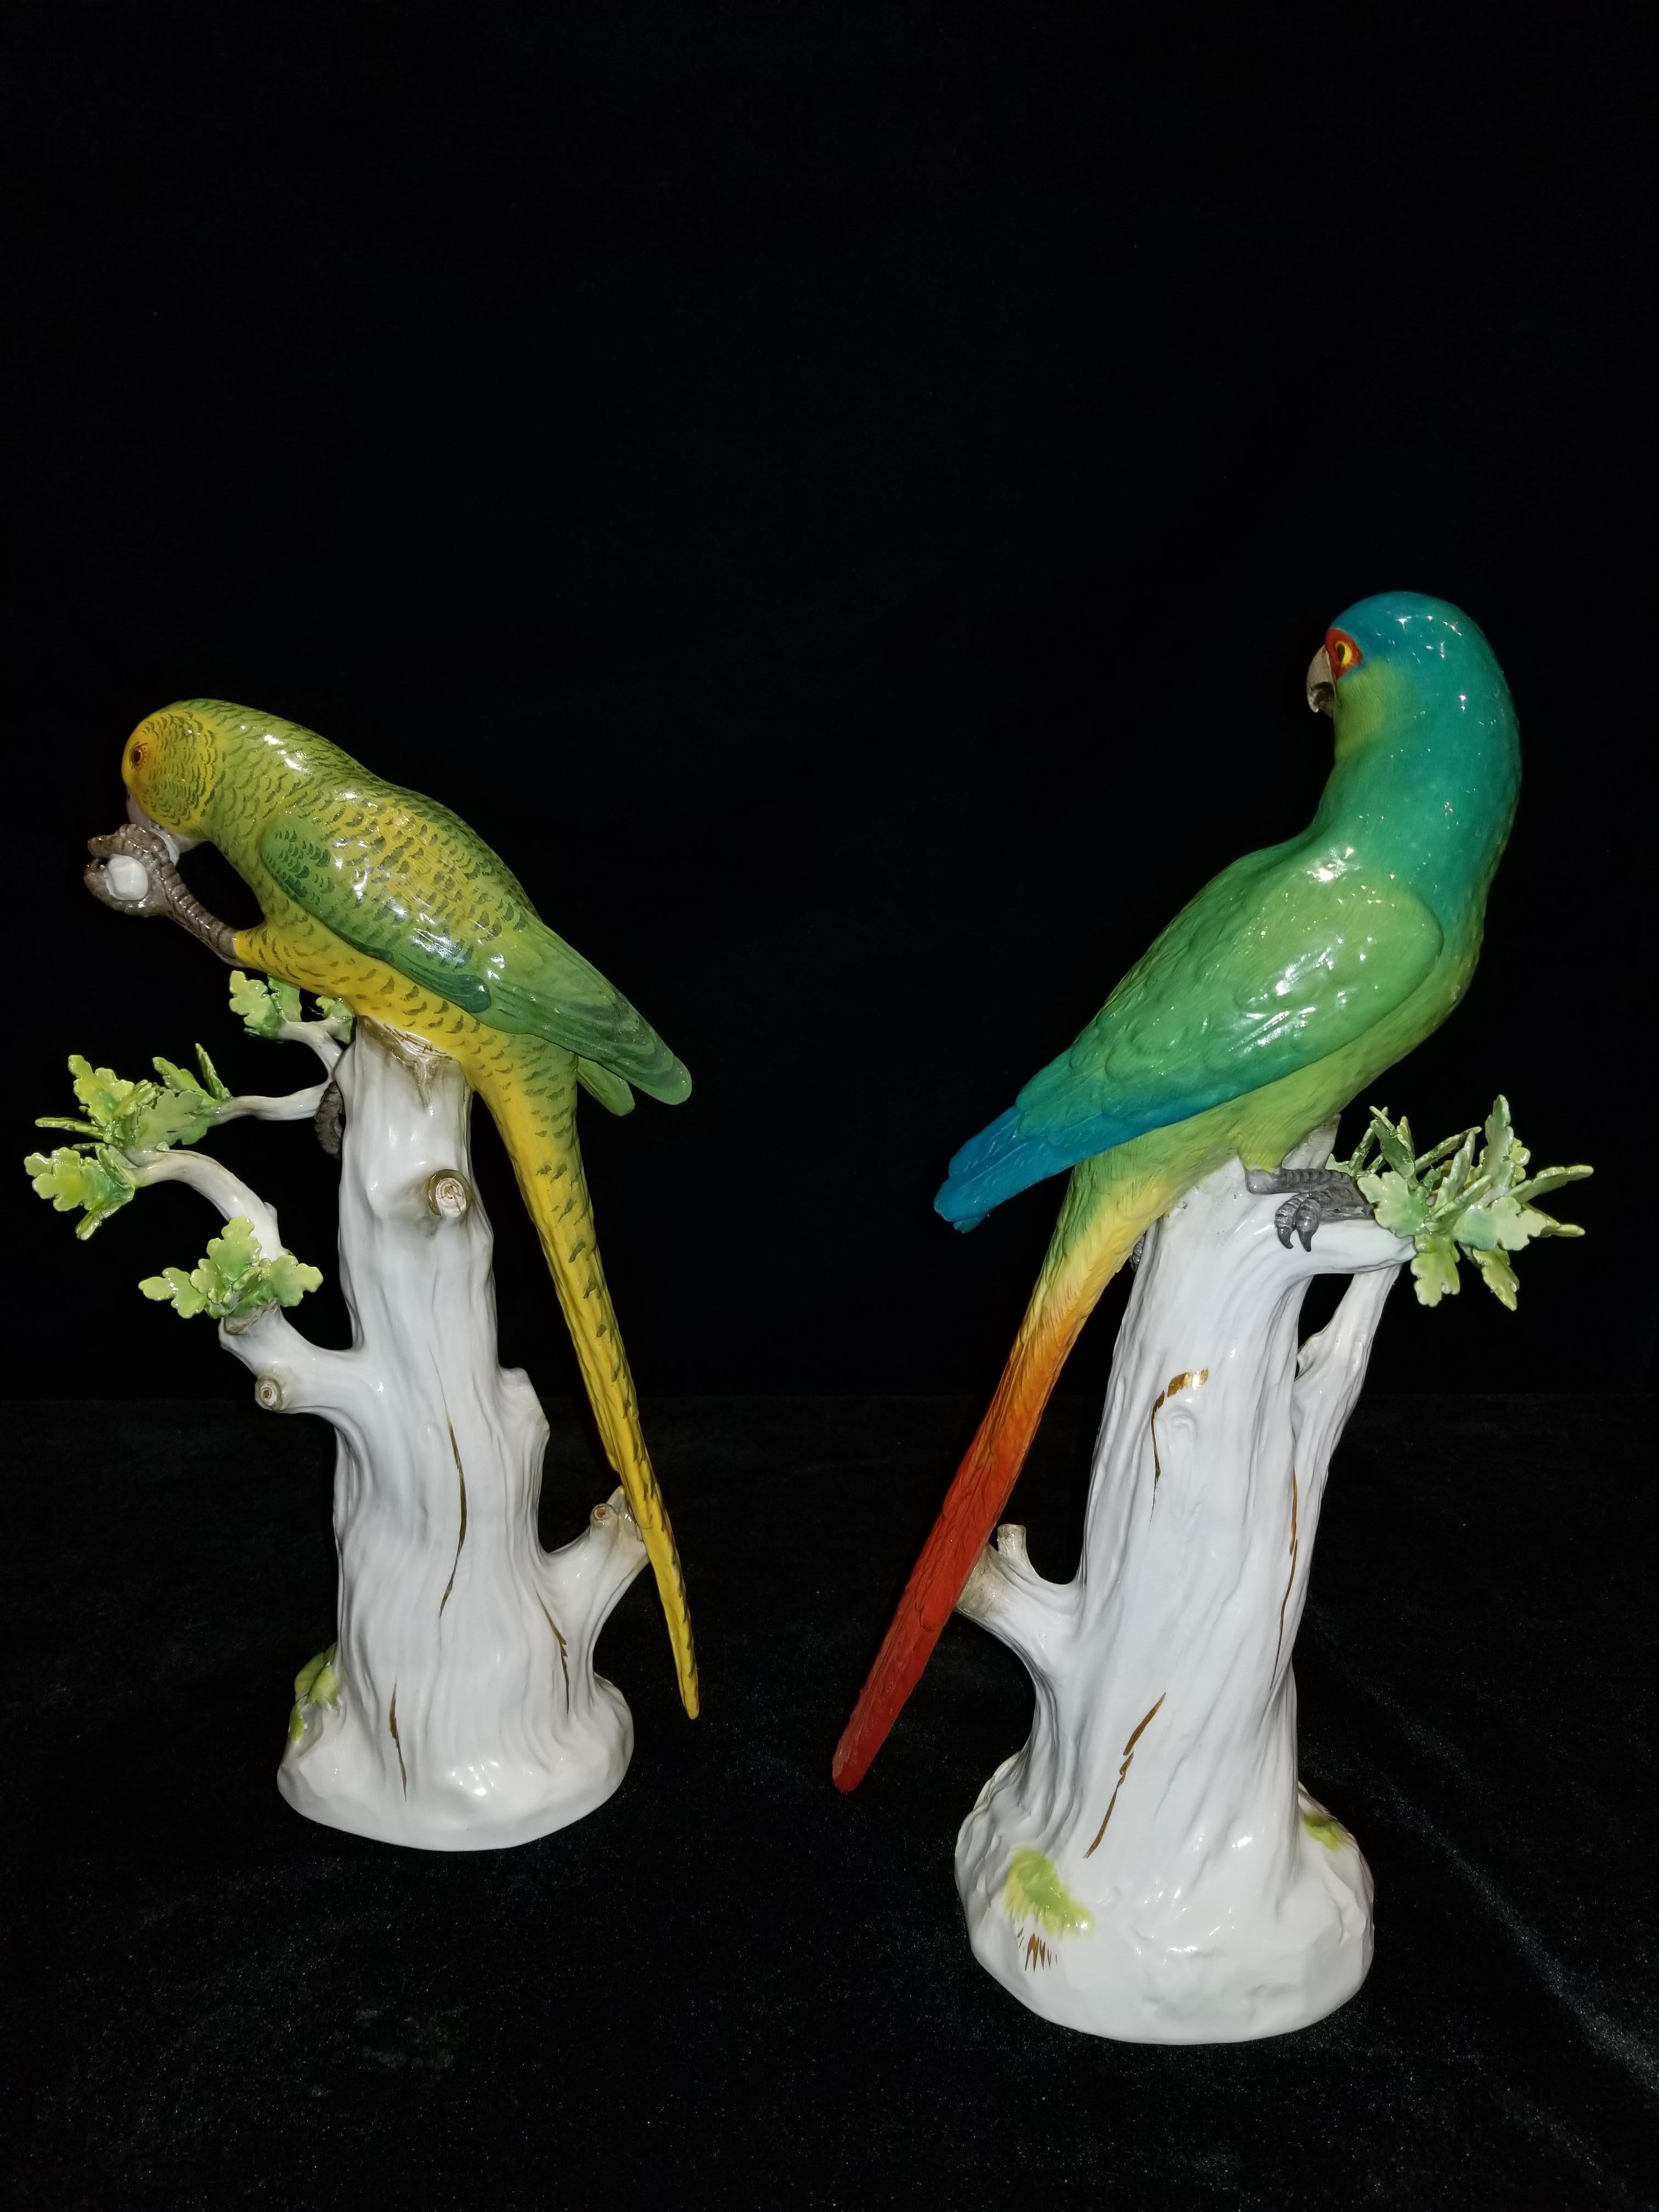 German Meissen Porcelain Figures of Parrots Standing on Tree Branches with Leaves, Pair